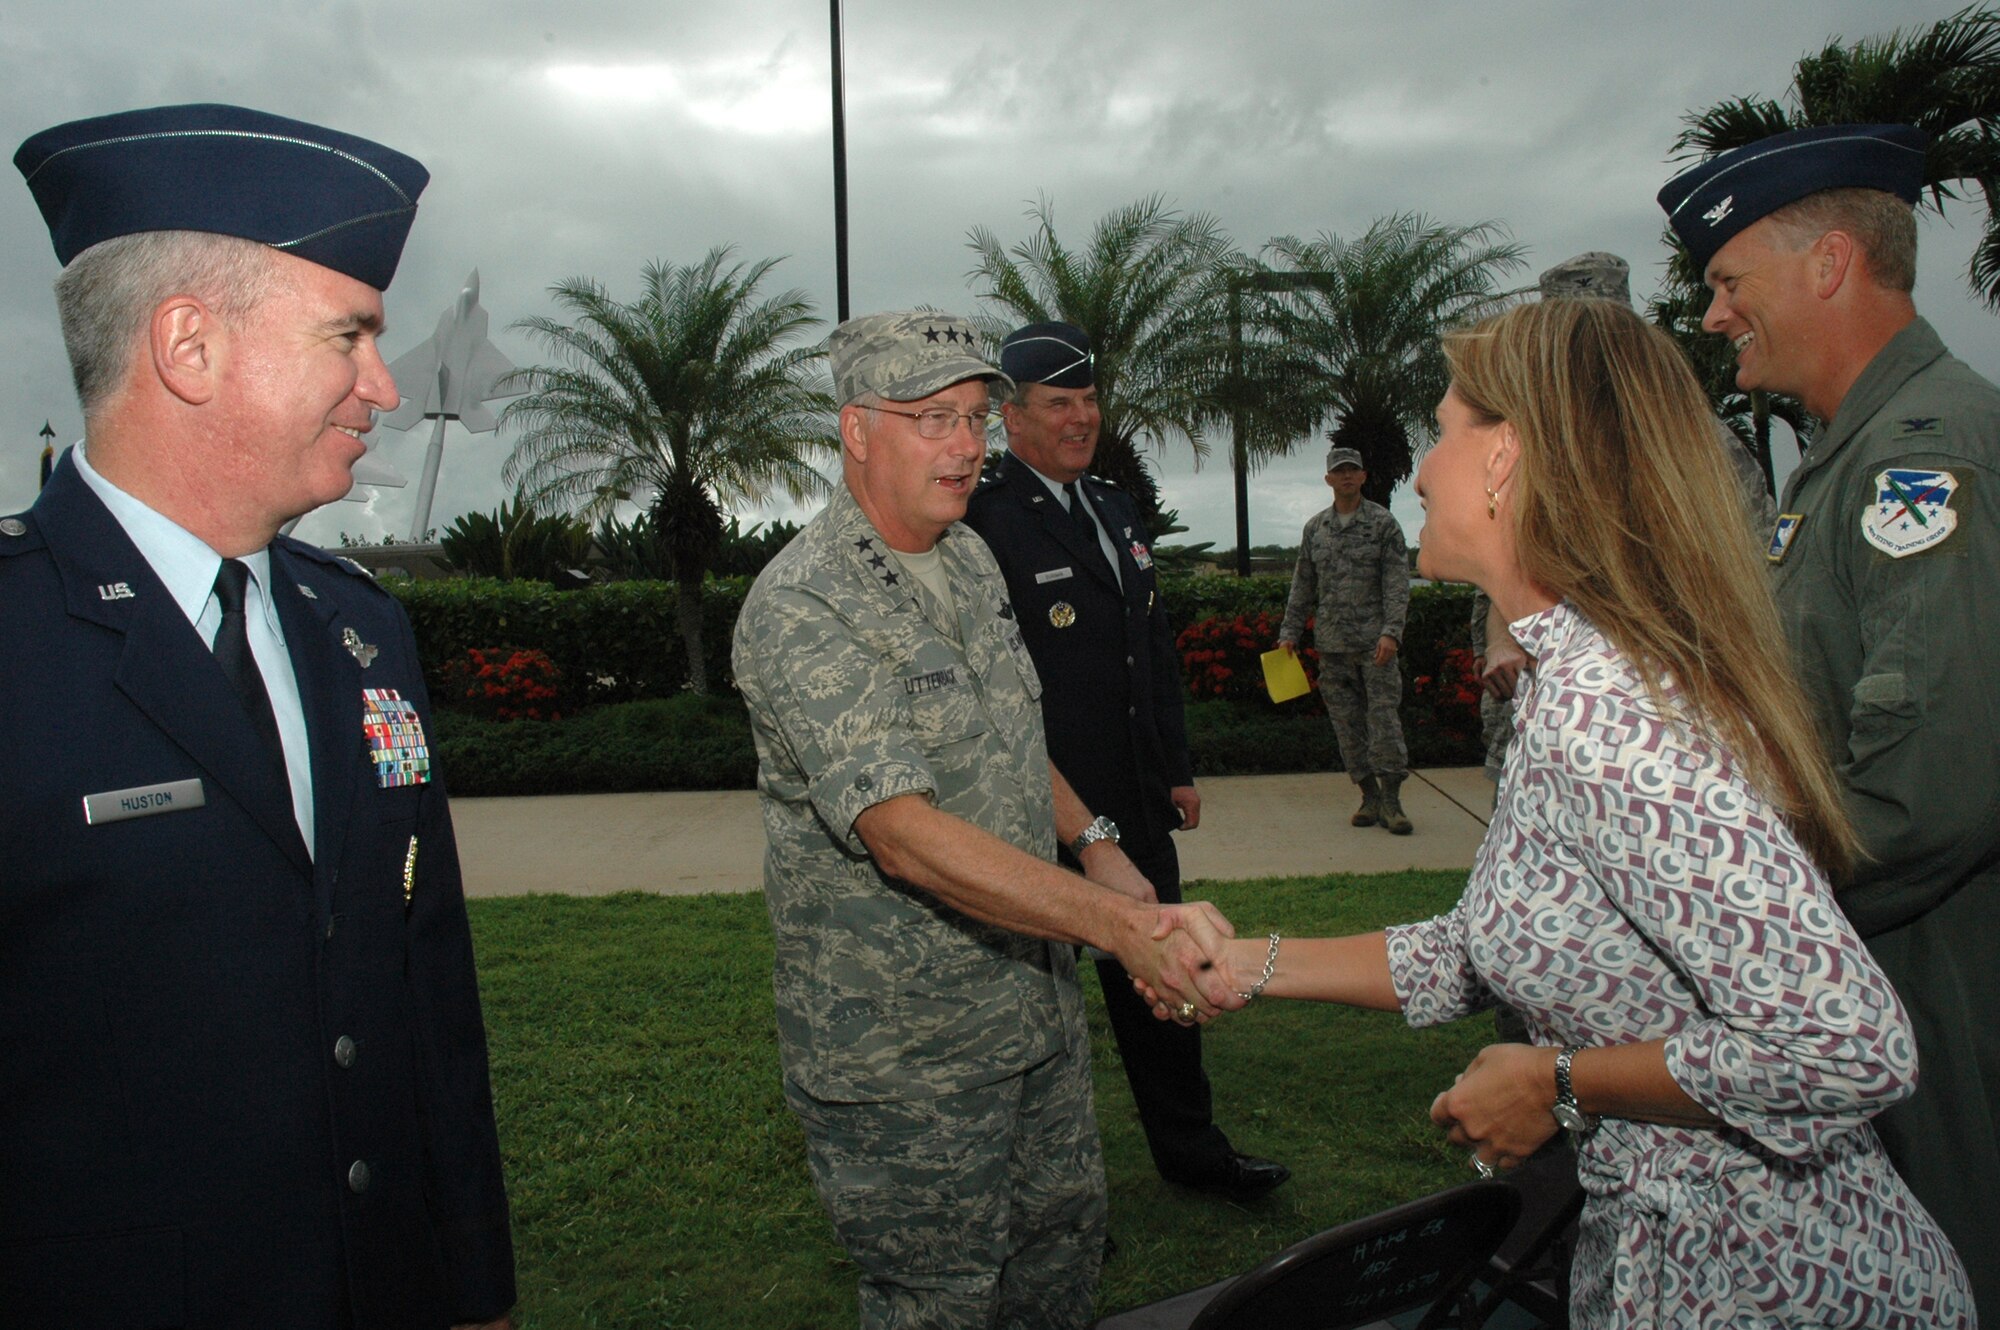 Lt. Gen. Loyd "Chip" Utterback, 13th Air Force commander, and Col. Robert Huston, 624th Regional Support Group commander, greet guests after the assumption of command ceremony Jan. 10 at Hickam Air Force Base, Hawaii. Prior to assuming command of the 624th RSG, Colonel Huston worked as the Reserve advisor to General Utterback. Colonel Huston's responsibility as commander of the 624th RSG is managing the largest Air Force Reserve presence in the Pacific, which is comprised of five units in Hawaii and Guam. The group provides the combatant commander more than 650 combat-ready Airmen who specialize in aerial port, aeromedical staging and civil engineering operations for worldwide employment. (Air Force photo/Master Sgt. Daniel Nathaniel)